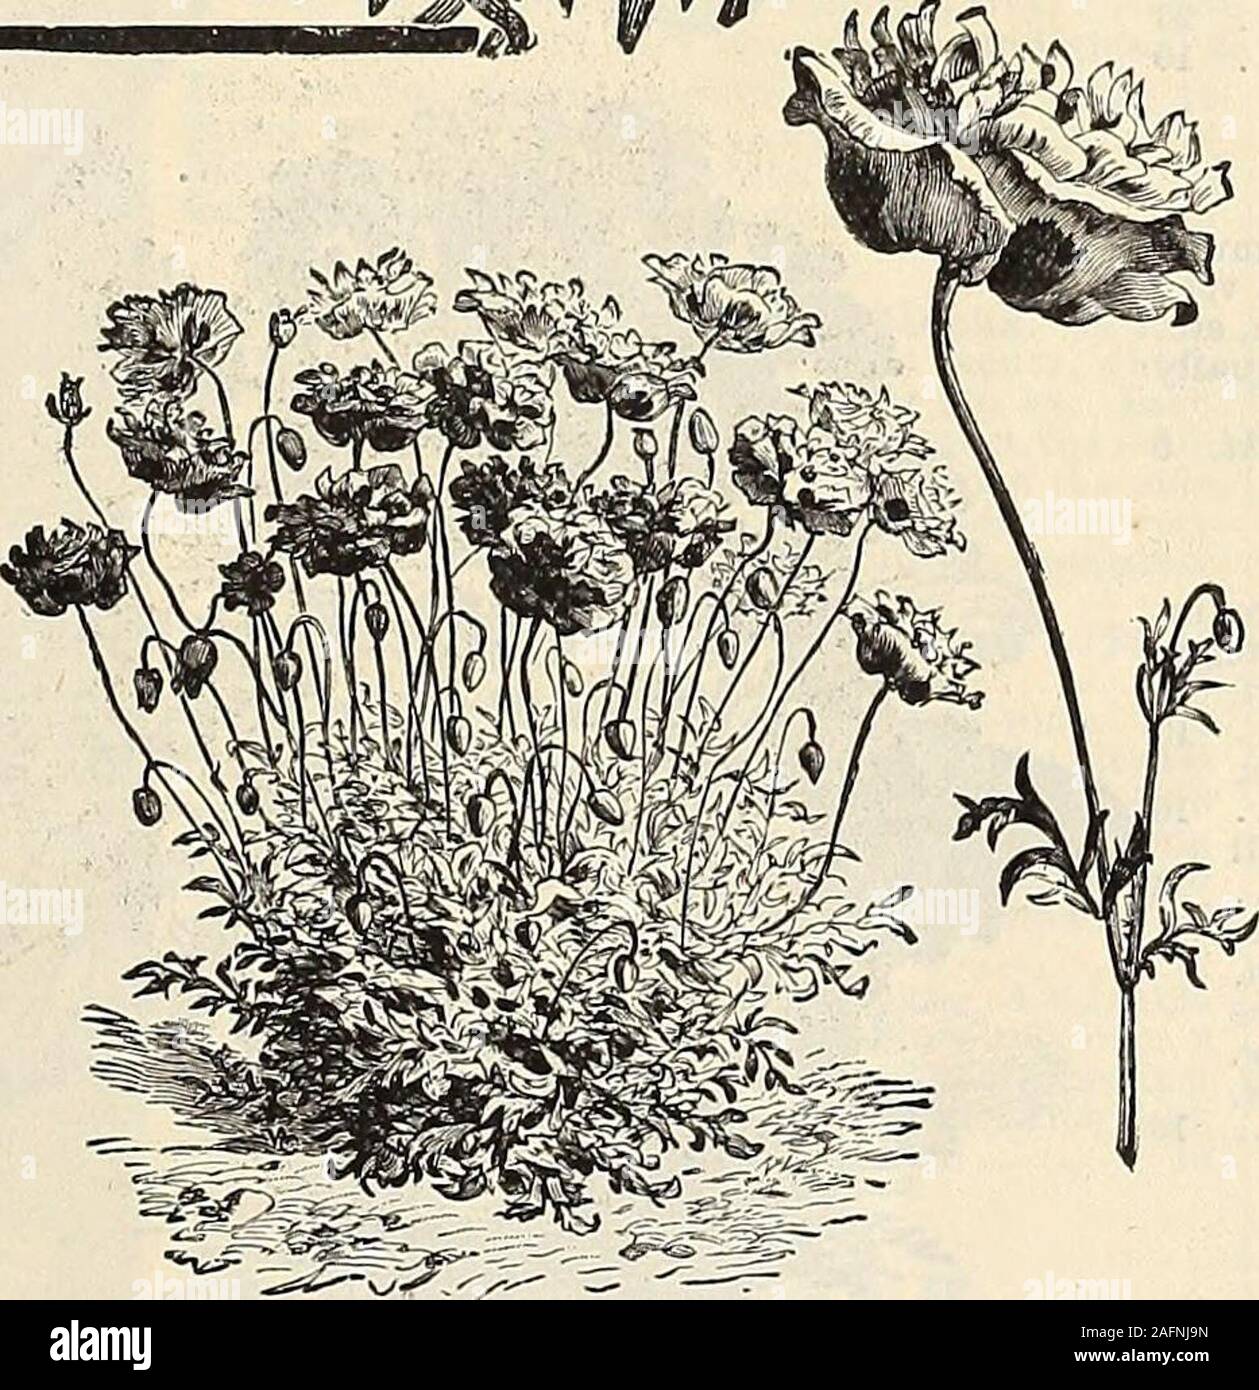 . Manual of everything for the garden : 1894. 30c. Iceland Poppies. (Papaver nudicaule.) Thefragrant elegant crushed-satin-like flowers areproduced in never-ceasing succession from thebeginning of June to October. The flowers lastquite a week if cut as soon as open. Bright Yellow— 10 Vivid Scarlet 10 Pure White 10 Gold Tinged, crimsn 10 Mixed Colors 10 Rose Colored 25 Collection of 5 separate varieties Iceland Poppies, 50 cts. Double Poppies. New Double Scarlet Iceland Poppy. (Pa-paver nudicaule coccineum ft. pi.) This new varietybears extremely double orange scarlet flowers. 25 DoublejFrench Stock Photo